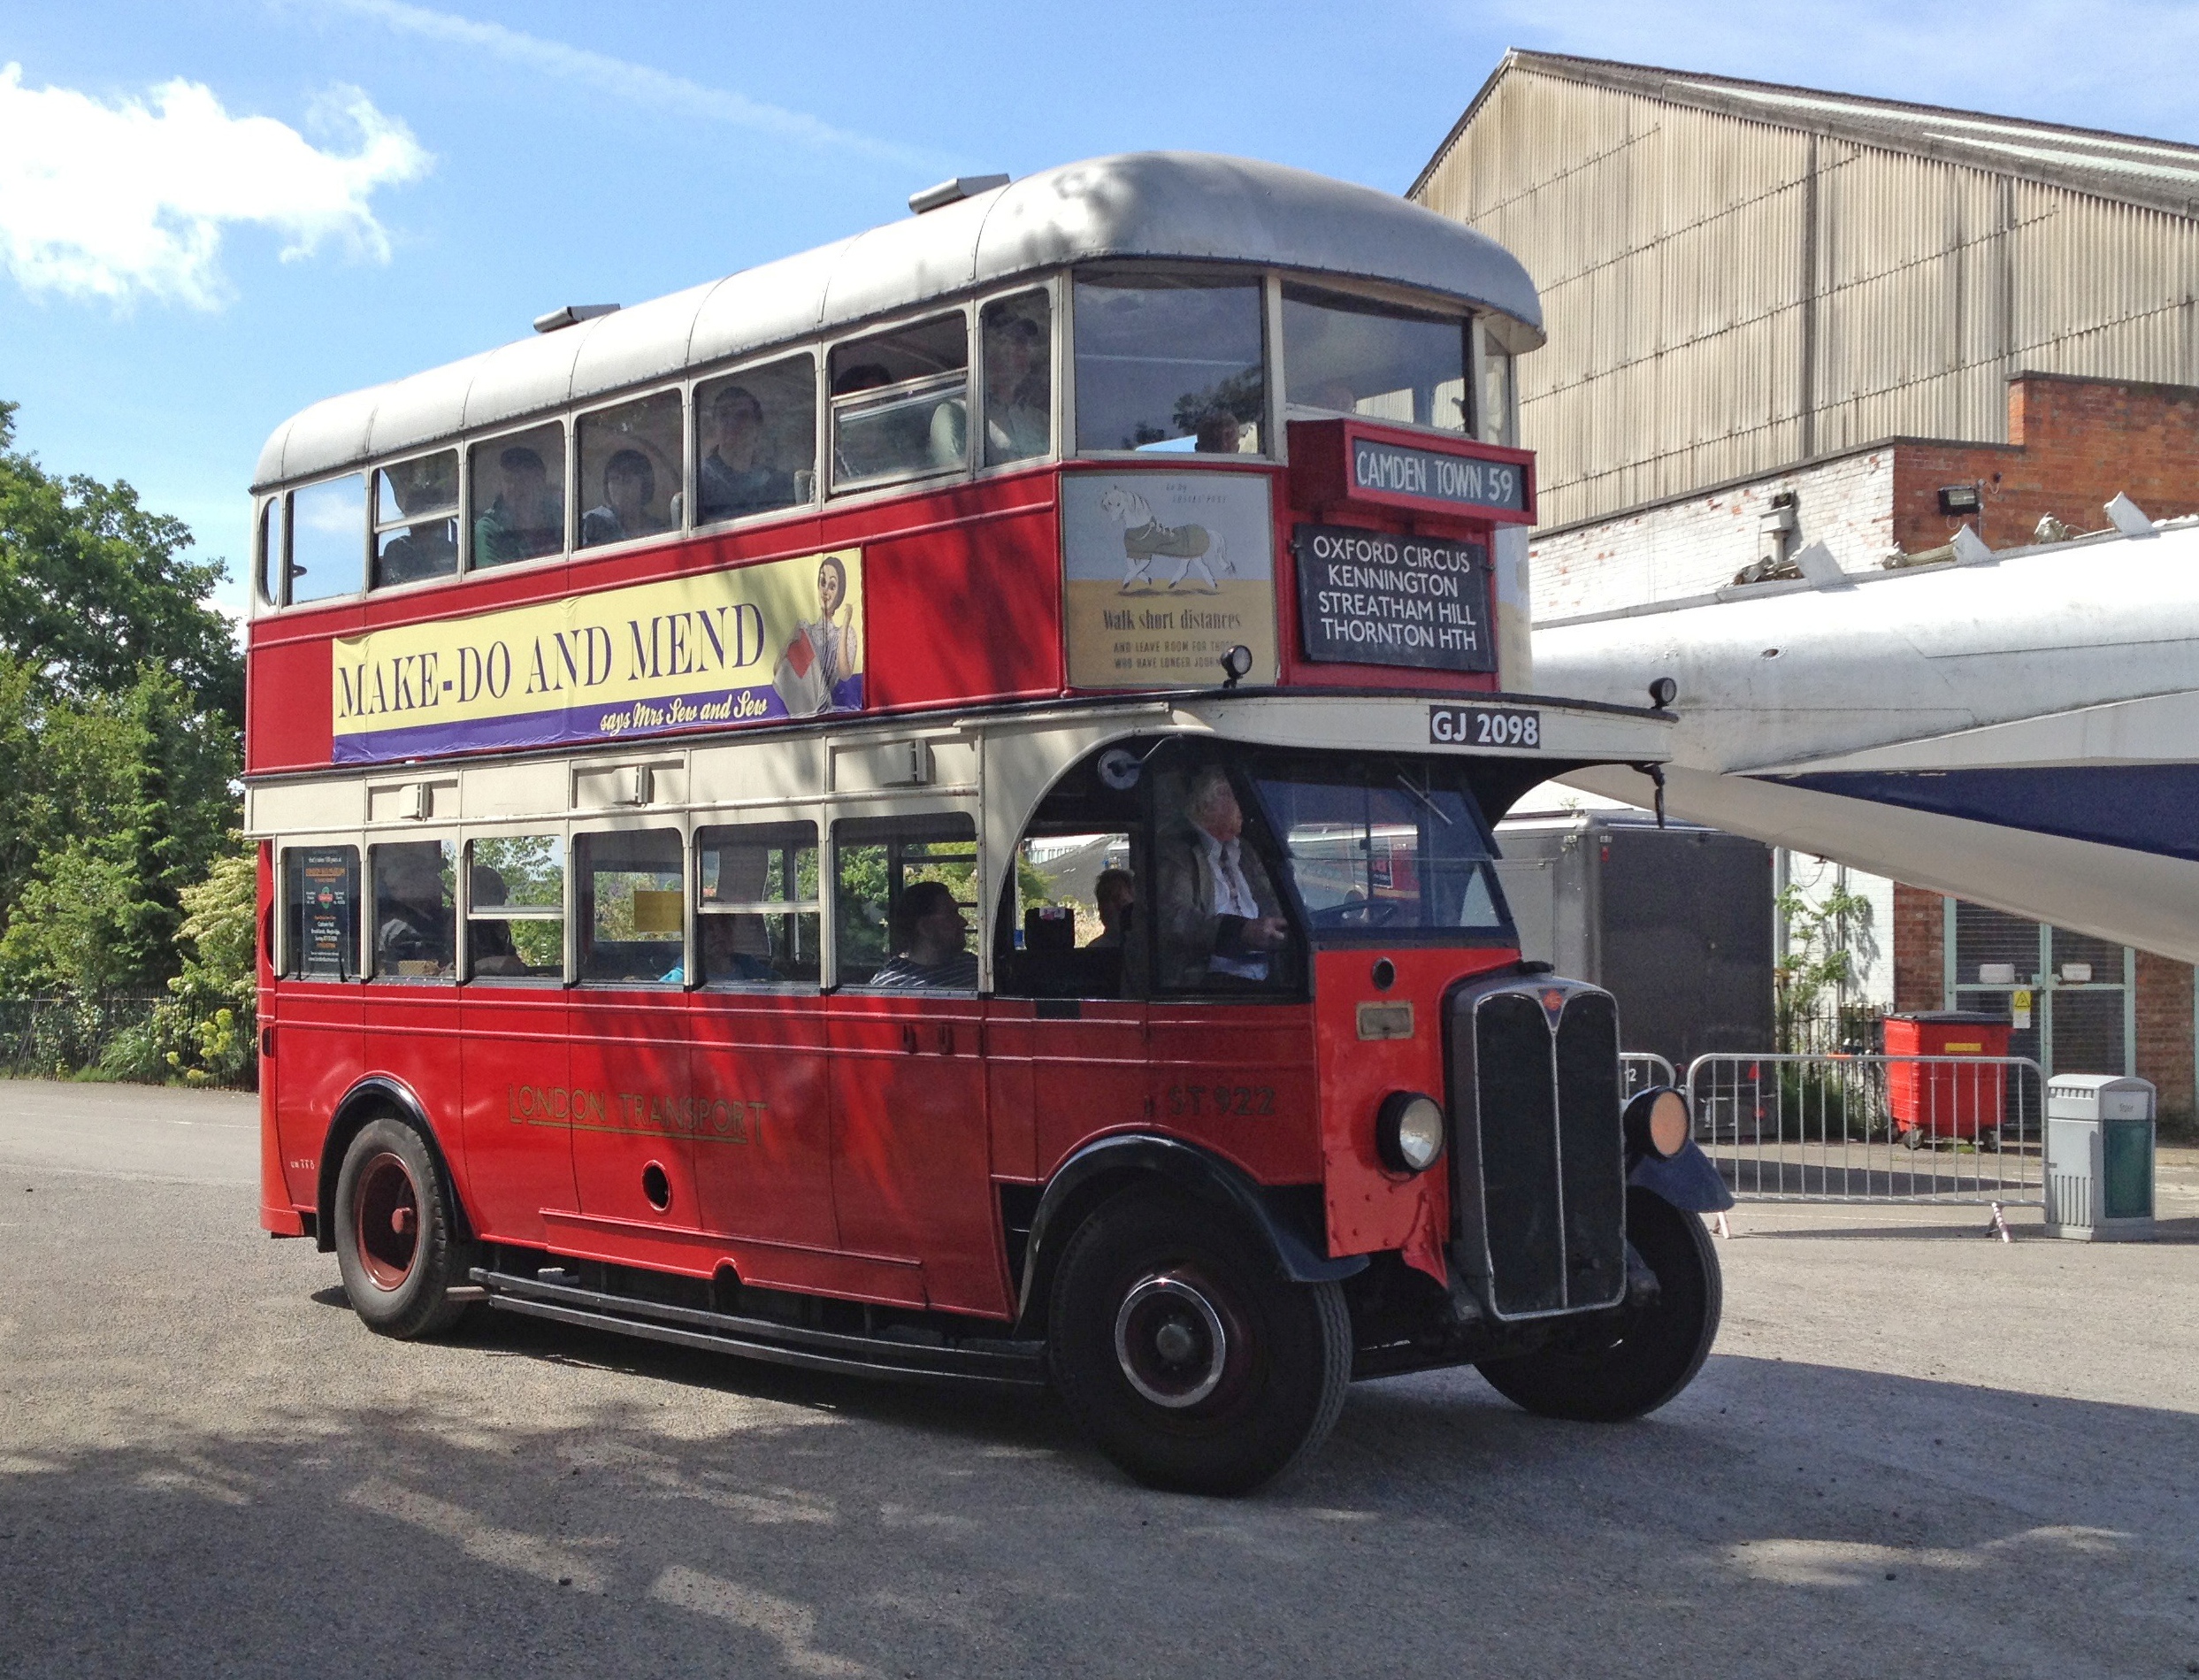 Report on "A Sixties Summer" - London Bus Museum